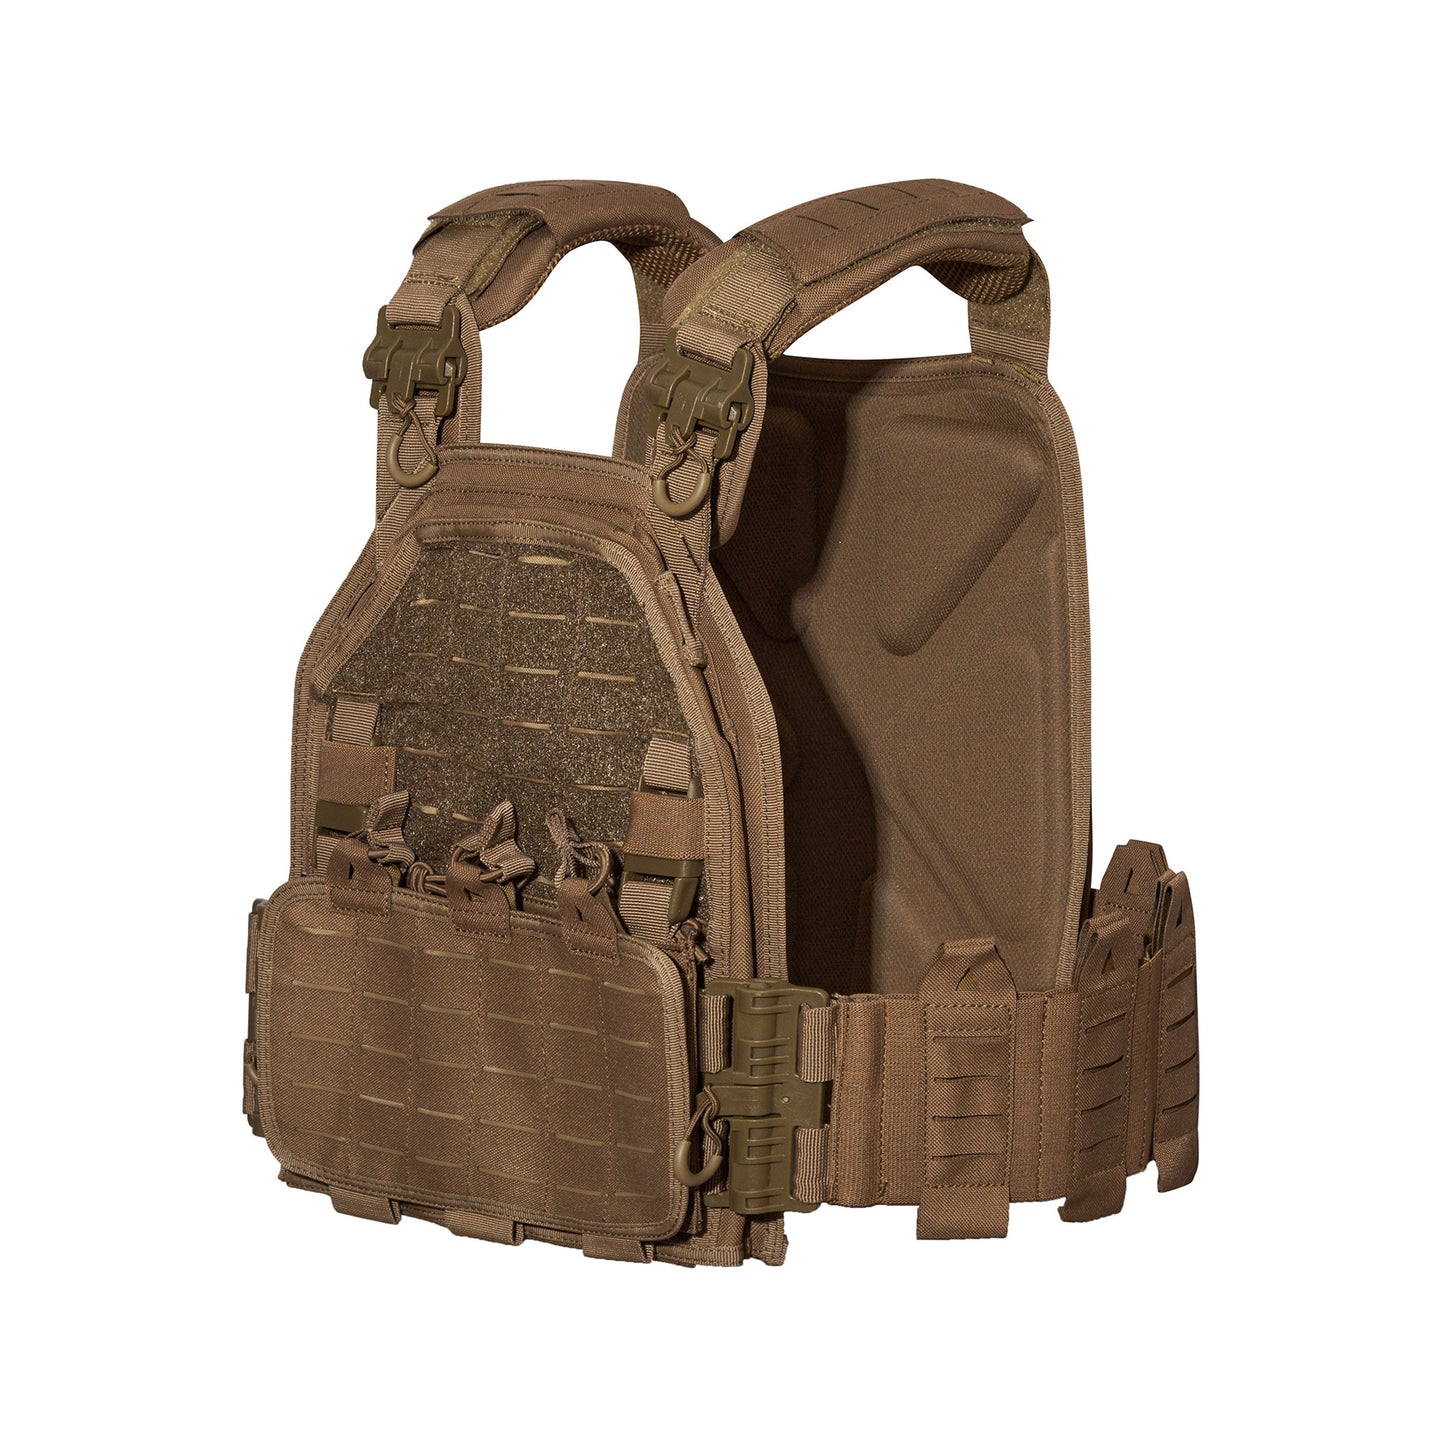 Quick-Release Plate Carrier